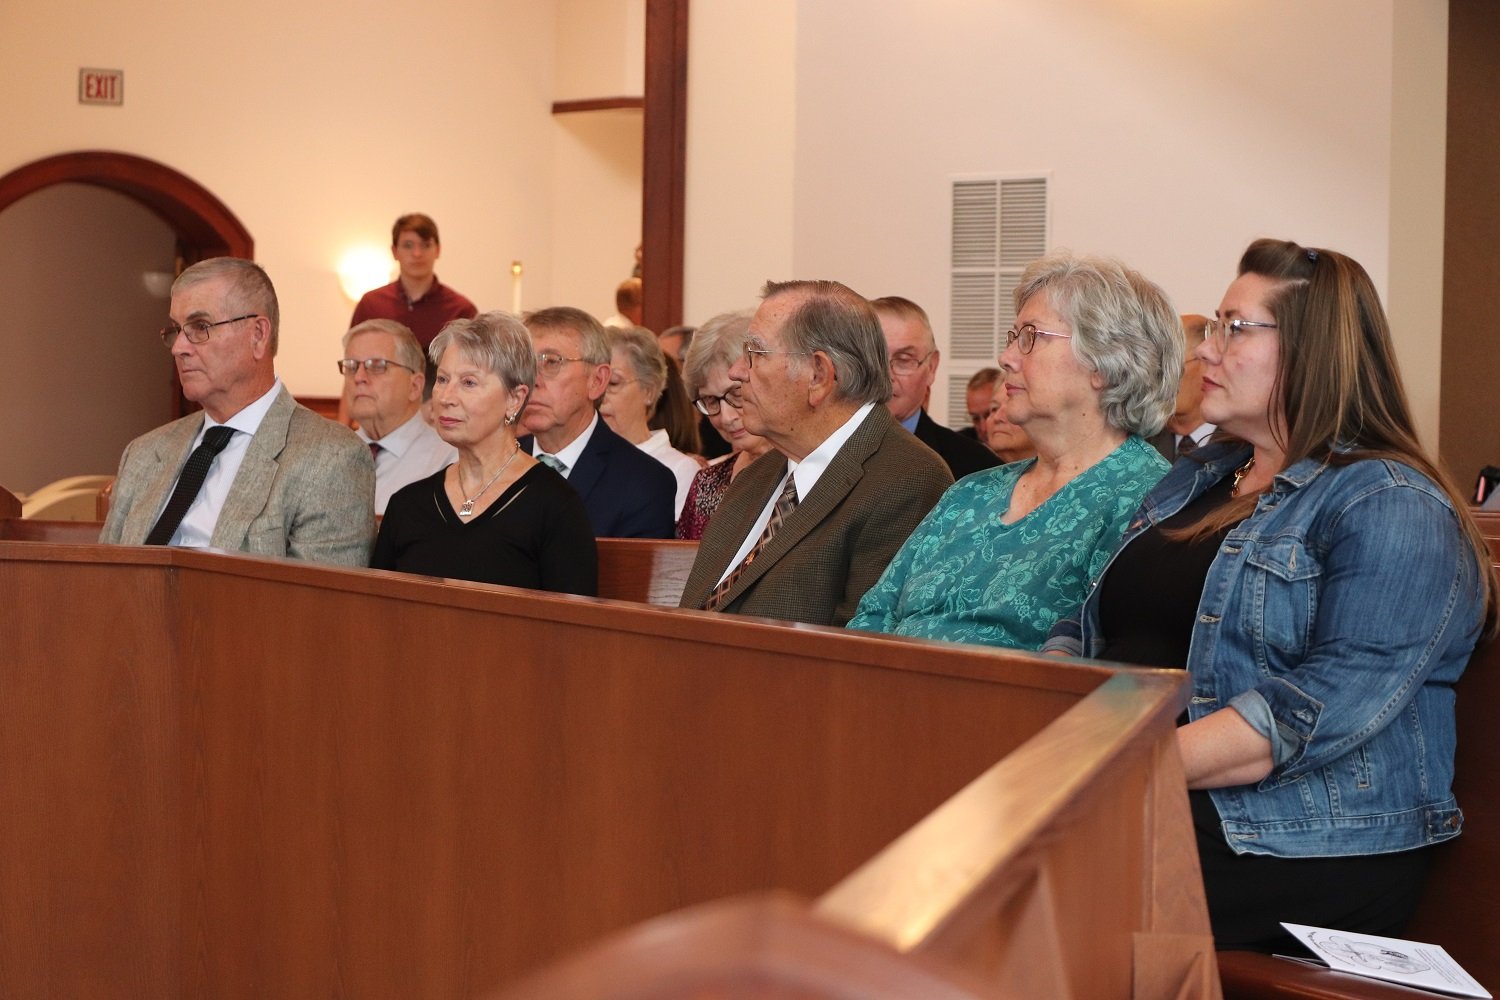  Some of Mother John Mary’s family. L-R: Devon (uncle and godfather), Janet (aunt and godmother), Bill (father), Bernadine (mother), Patricia (sister); Mother’s nephew Abe can also be seen in the background, wearing the red shirt 